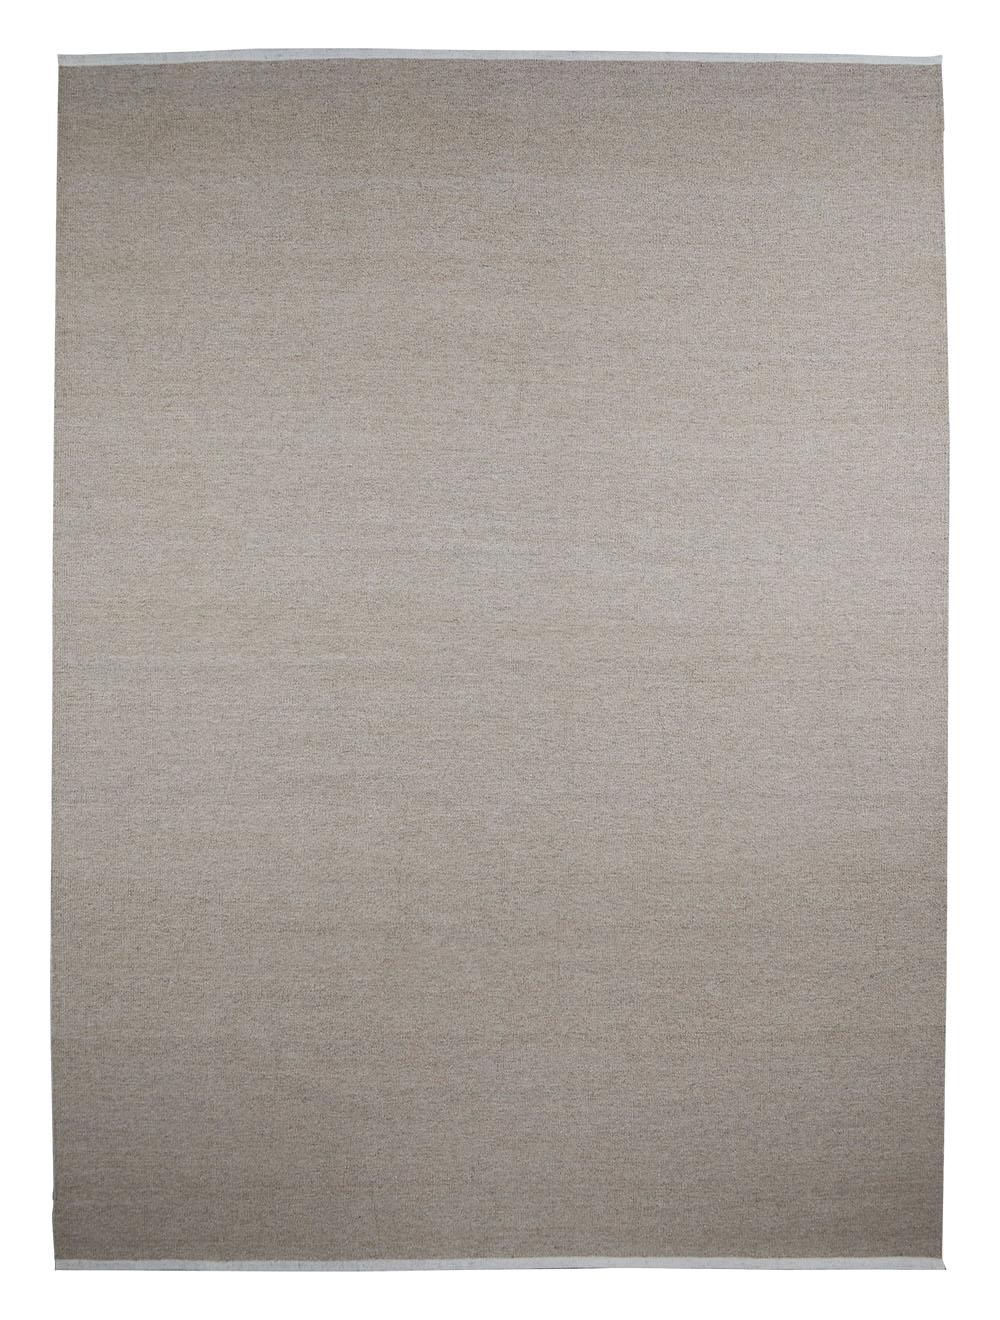 Light Beige Escape Kelim Carpet by Massimo Copenhagen
Designed by Space Copenhagen
Handwoven
Materials: 100% undyed natural wool.
Dimensions: W 300 x H 400 cm
Available colors: Chalk, Chalk with Fringes, Light Beige, Light Beige with Stitches,